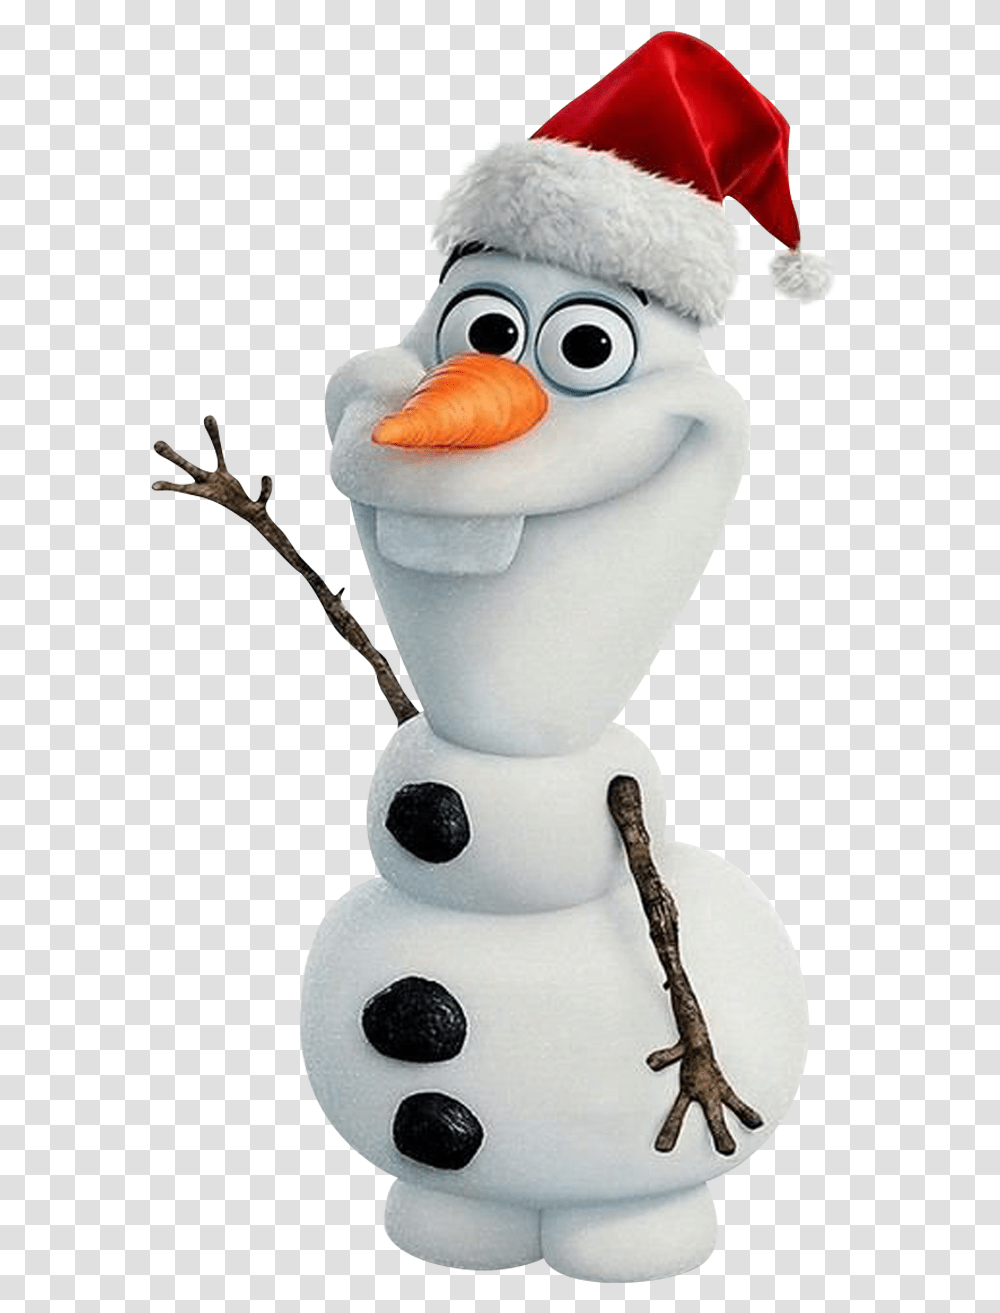 Frozen Olaf Pic Mart Merry Christmas Olaf, Snowman, Winter, Outdoors, Nature Transparent Png